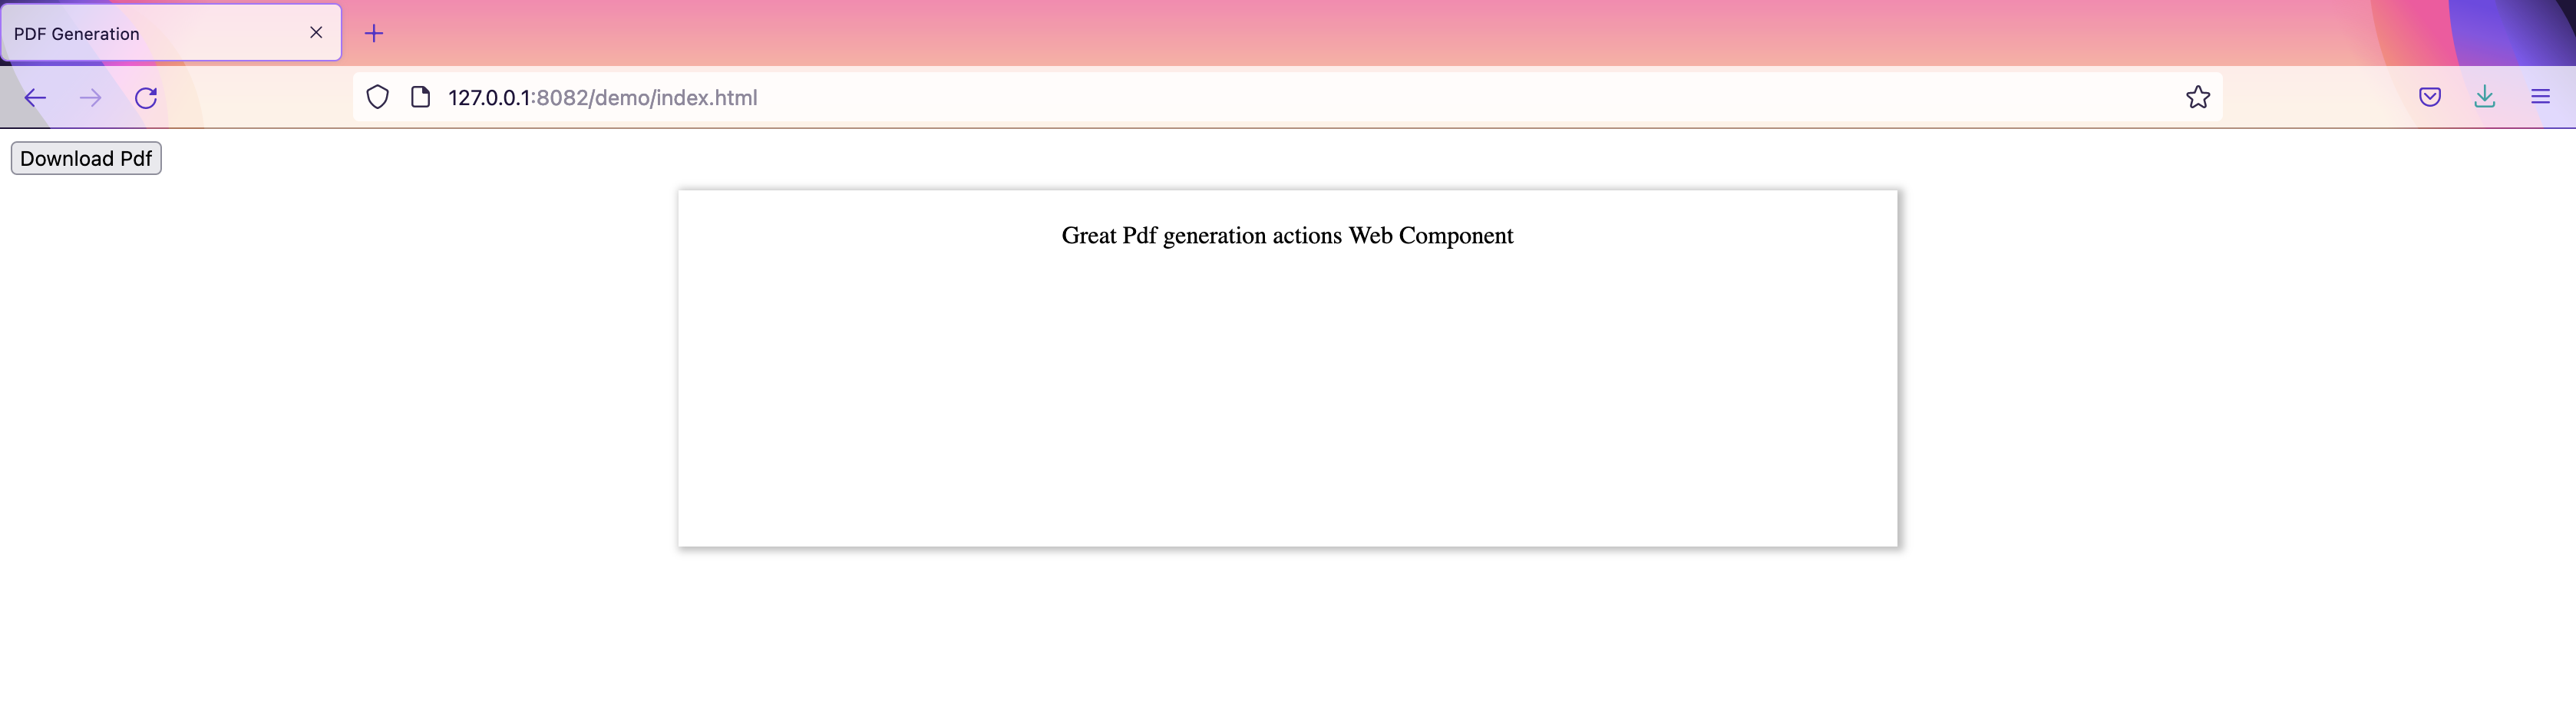 Image of the Web Component